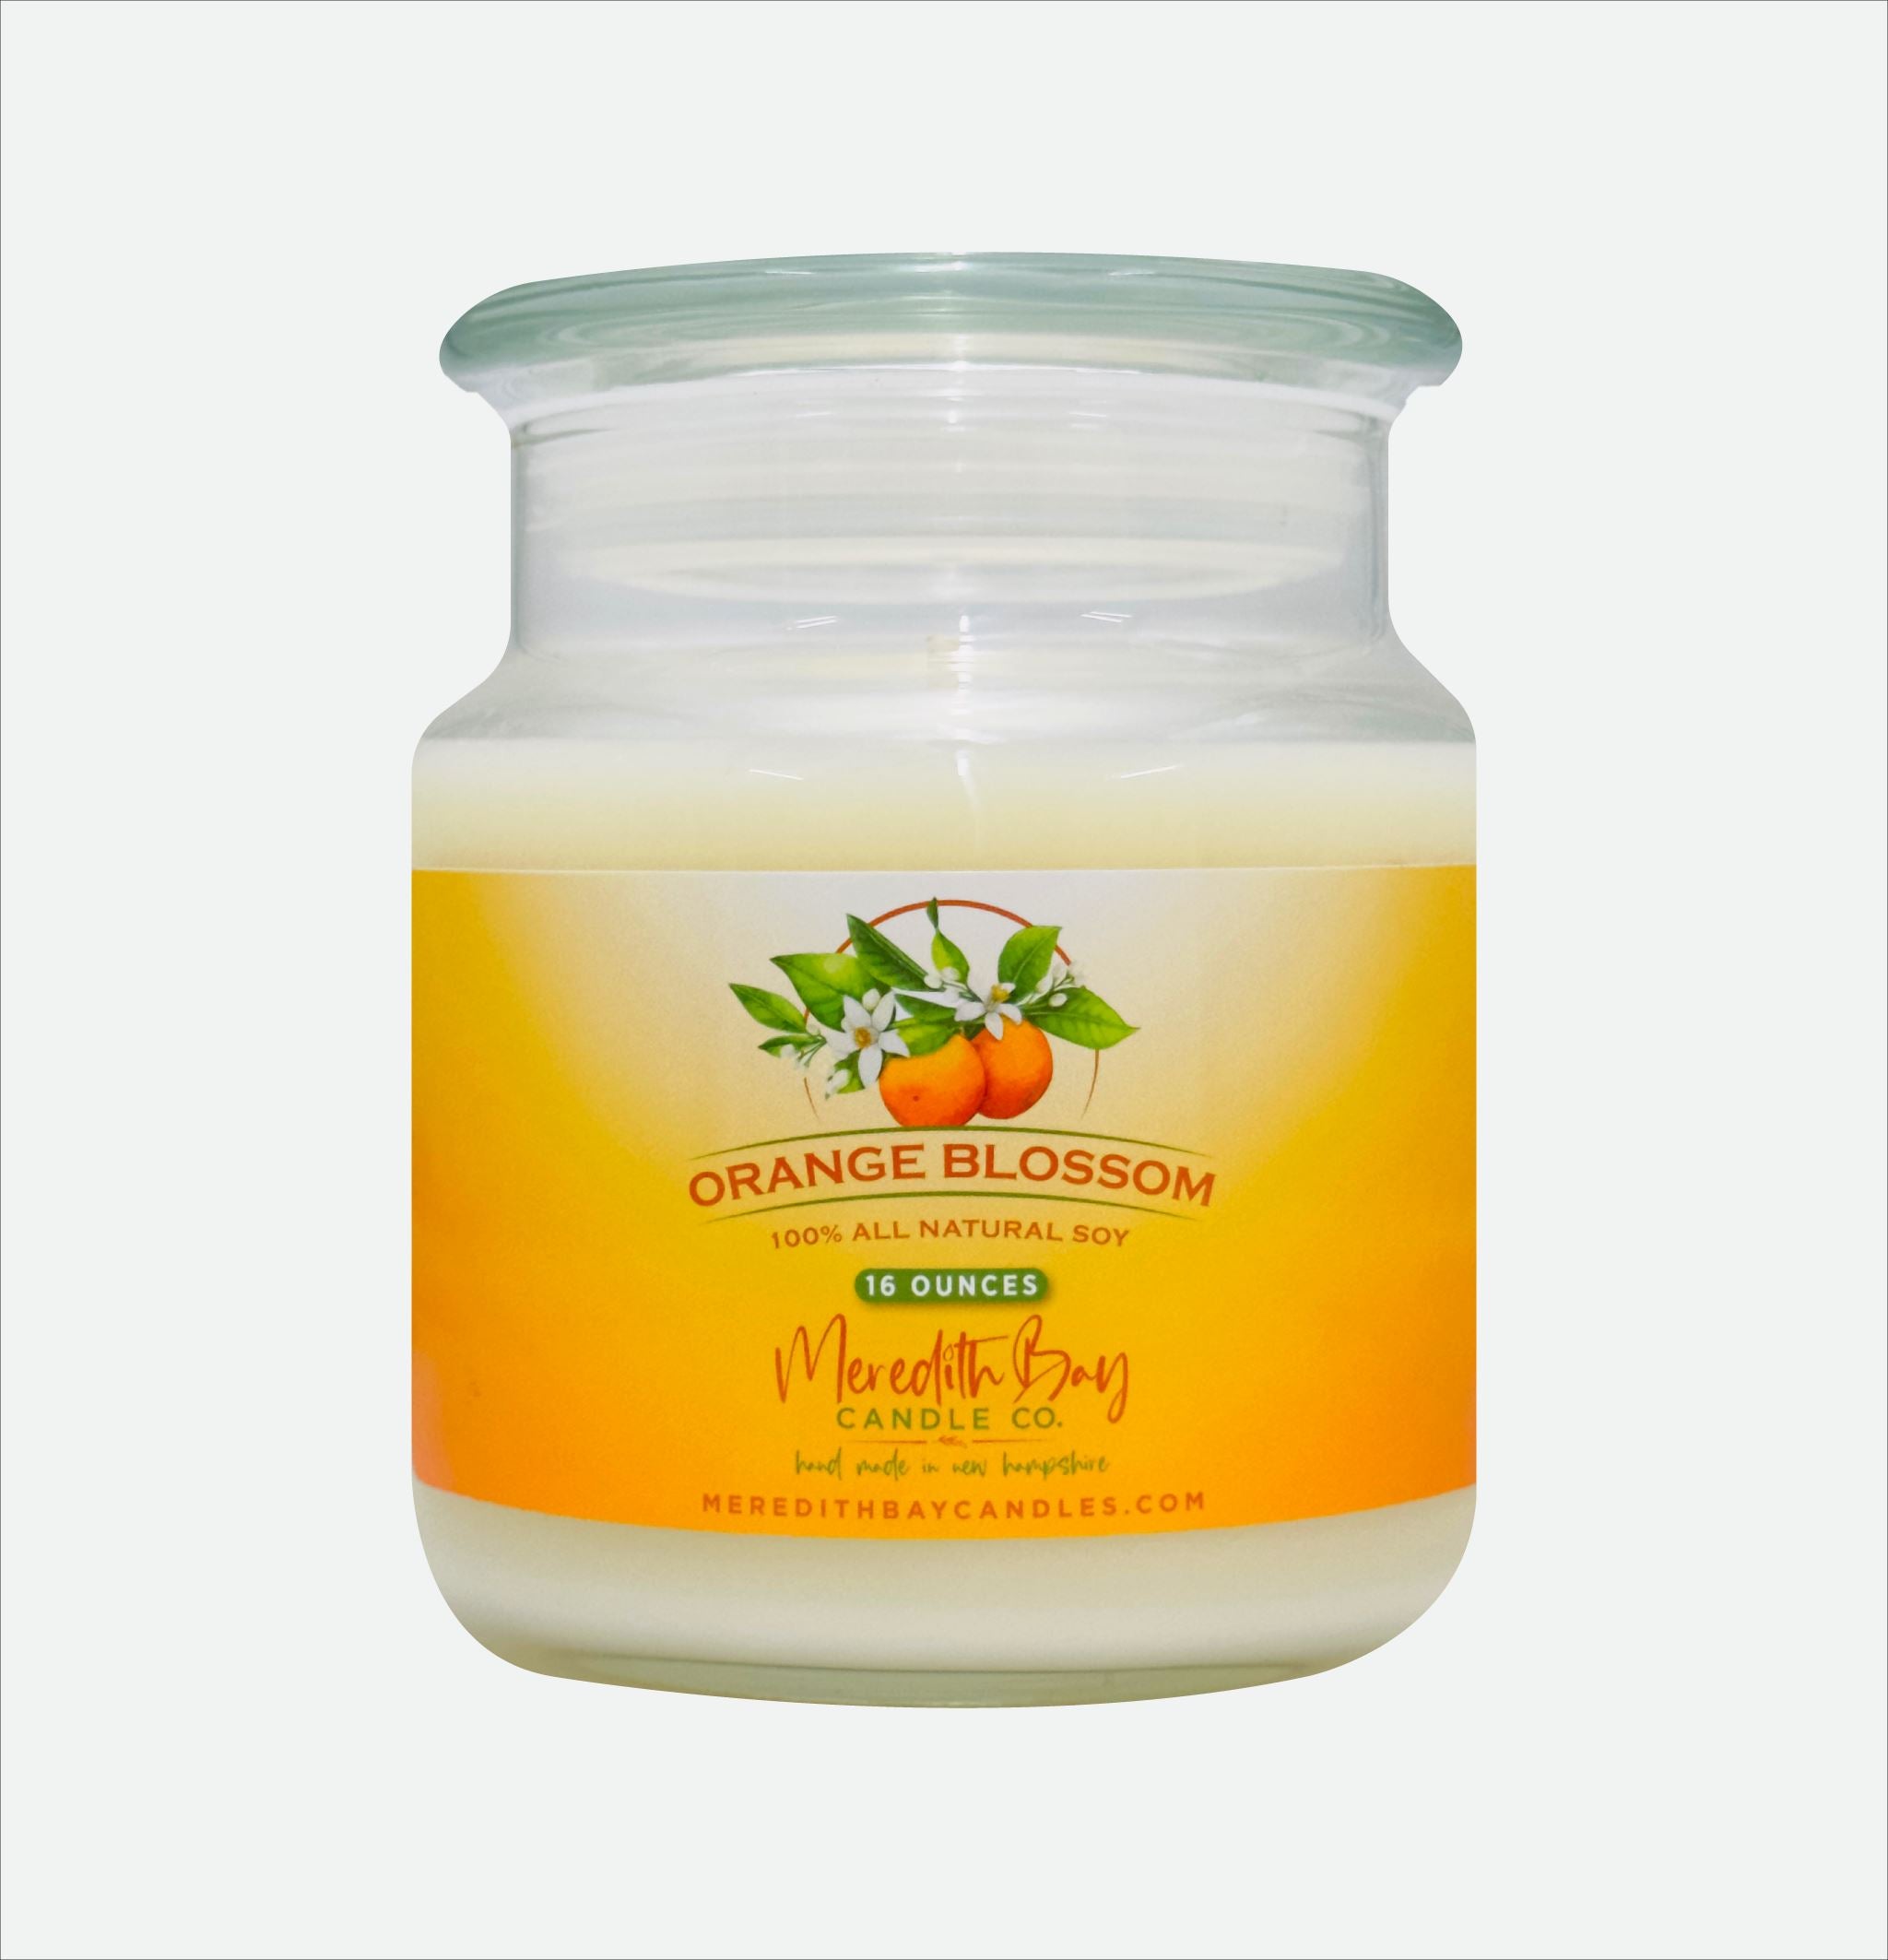 Orange Blossom Soy Candle Meredith Bay Candle Co 16 Oz 